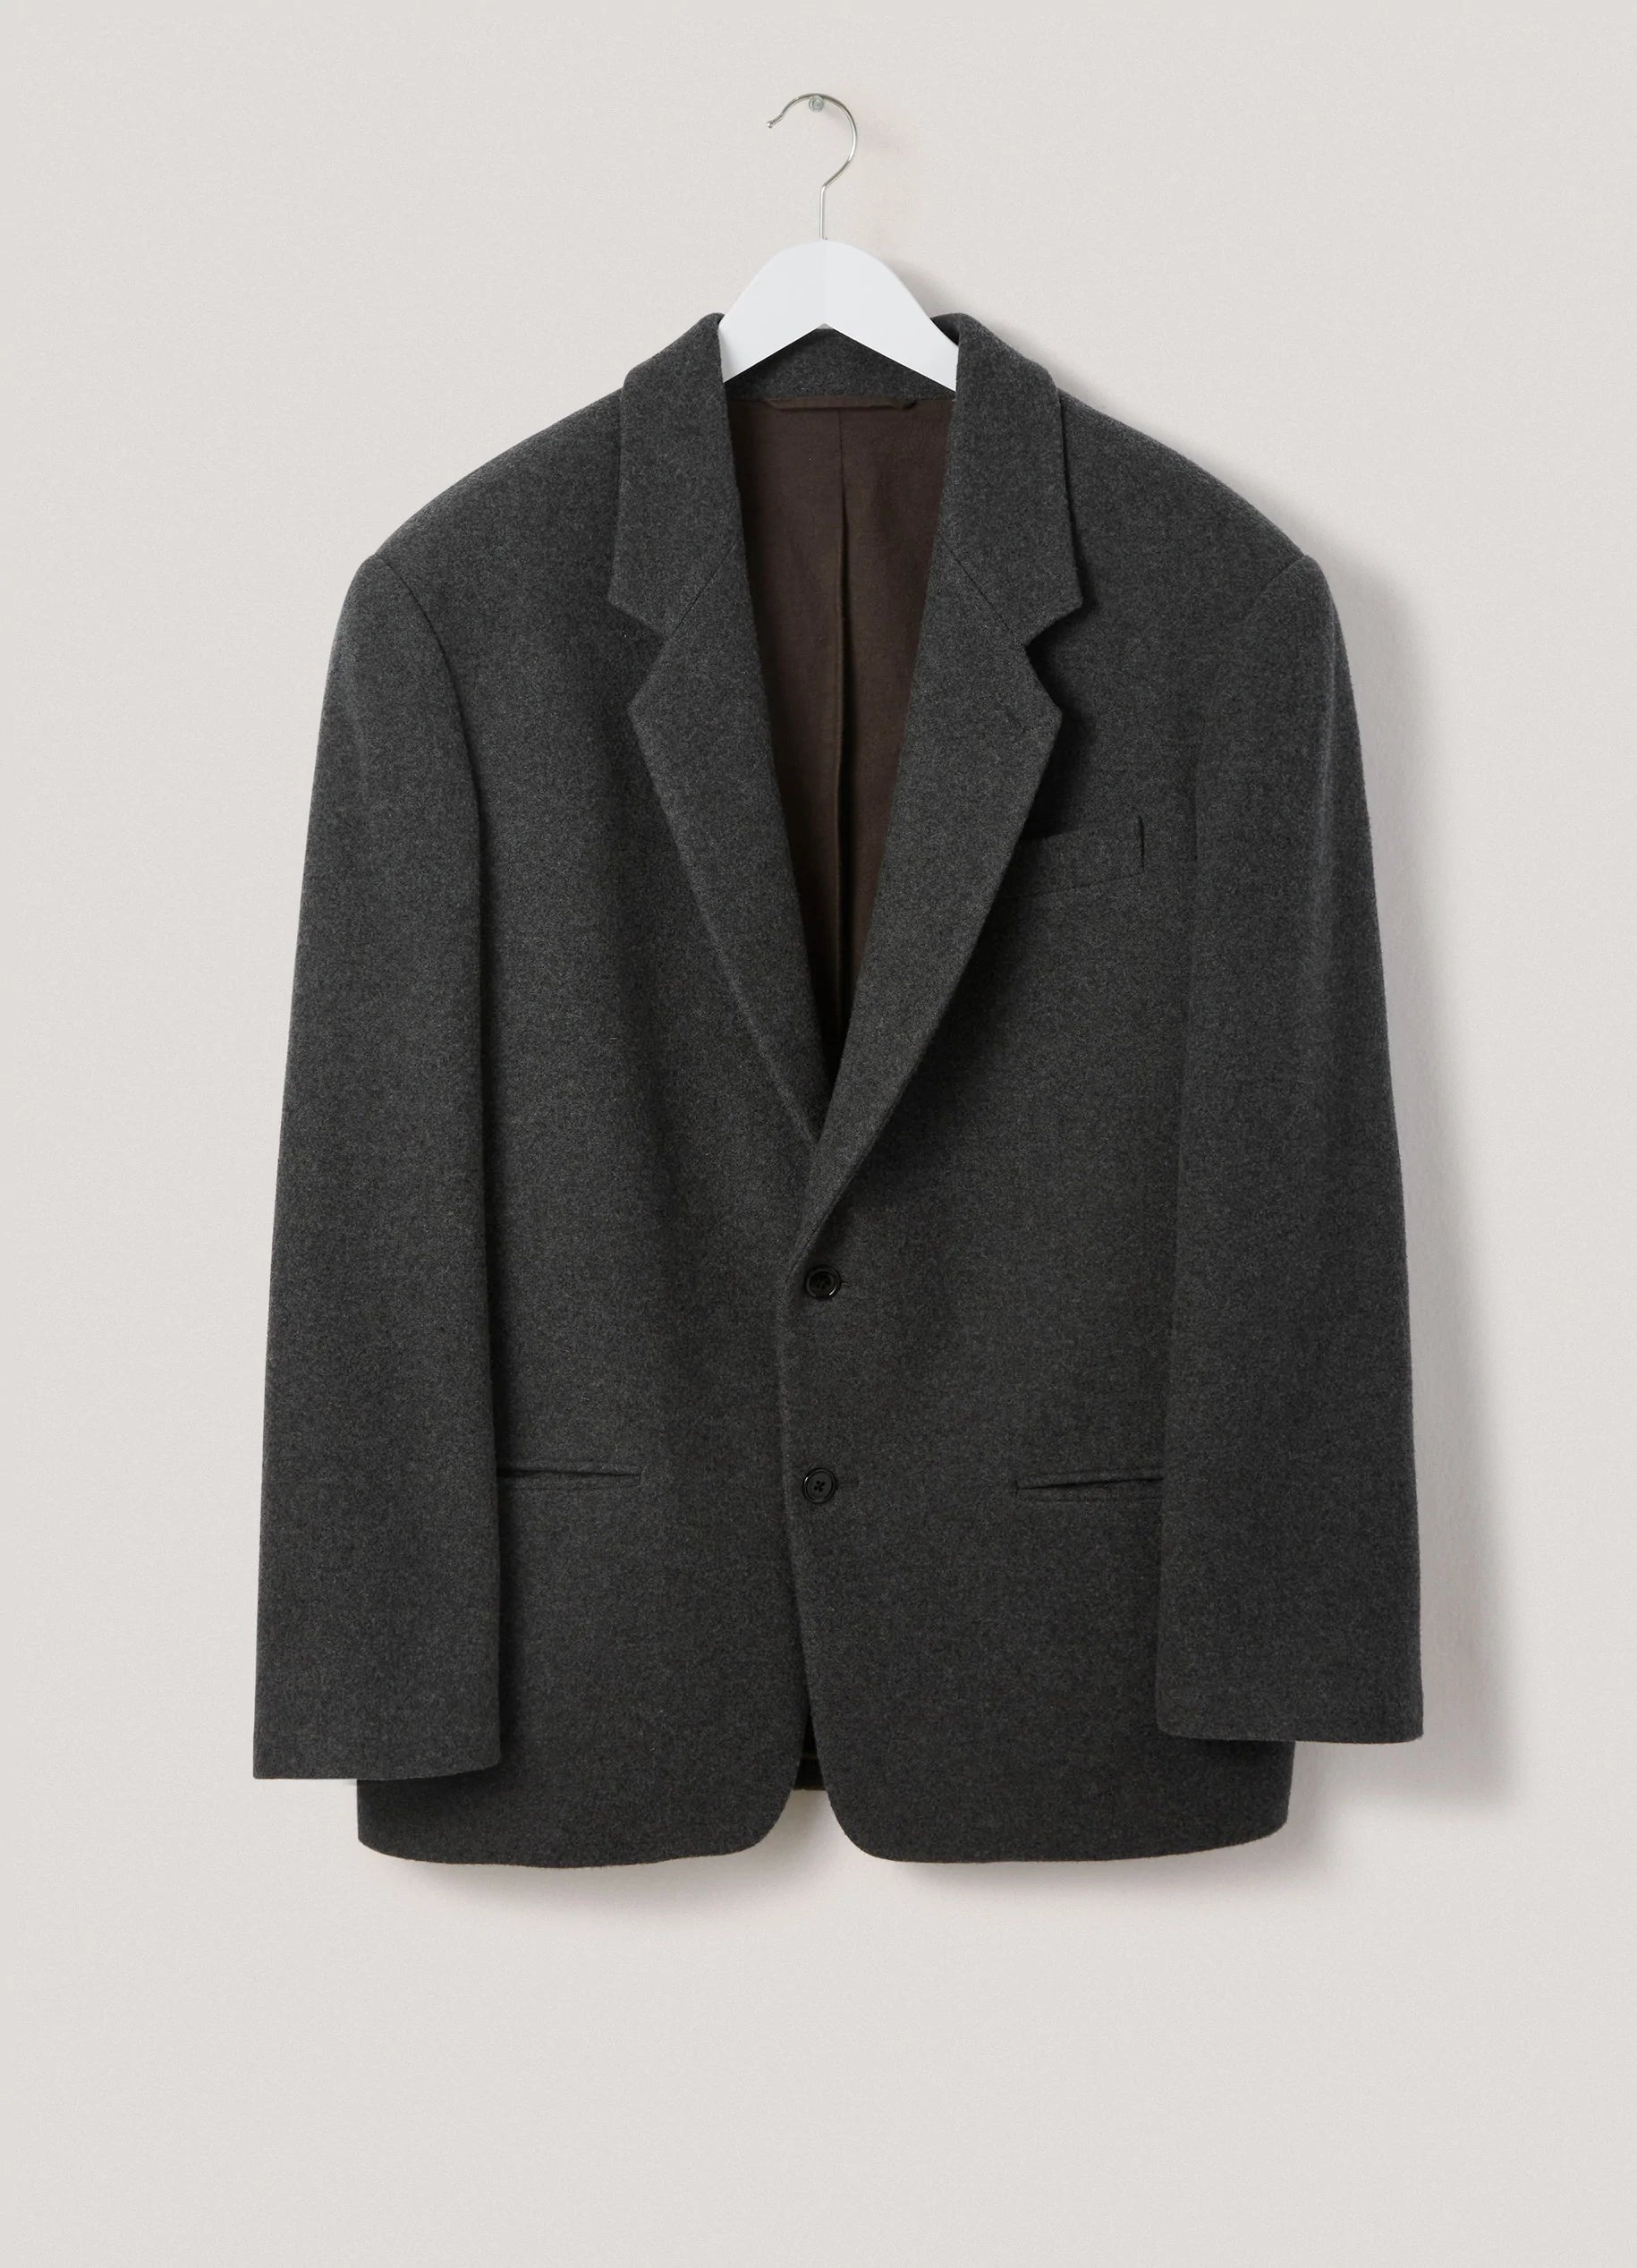 Lemaire BOXY SINGLE BREASTED JACKET SOFT FELTED WOOL | REVERSIBLE